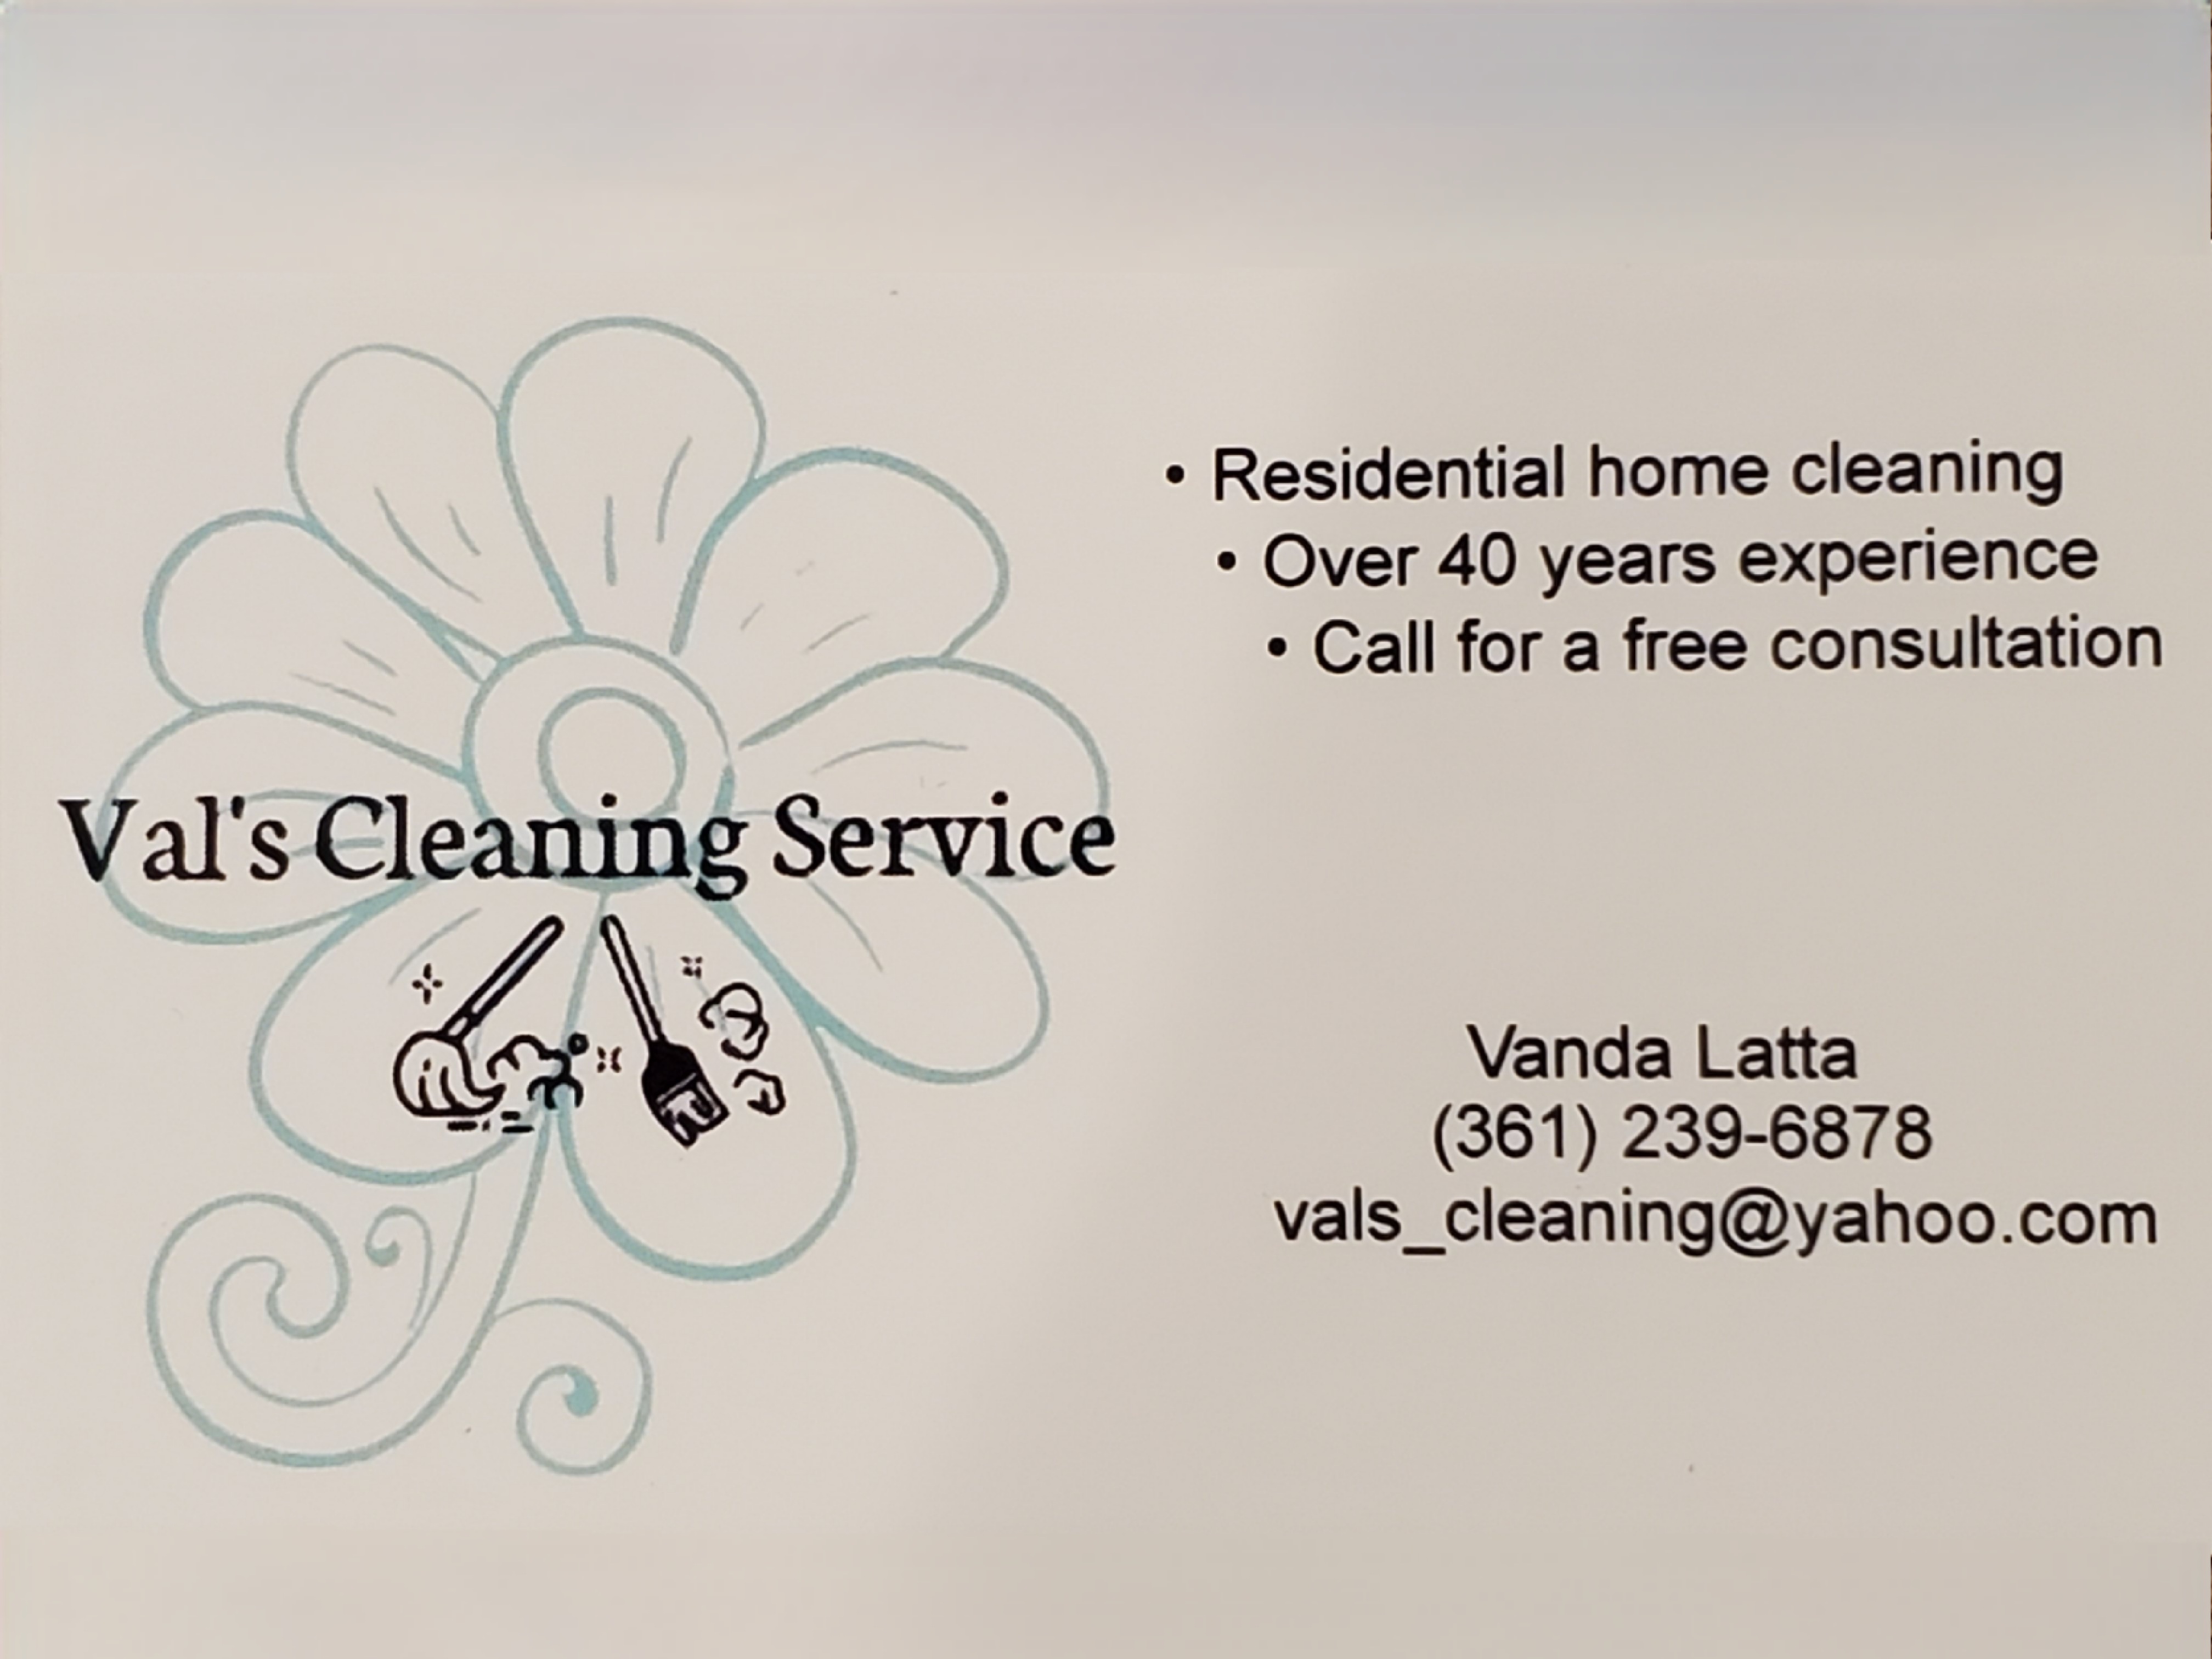 Vals Cleaning Service Logo